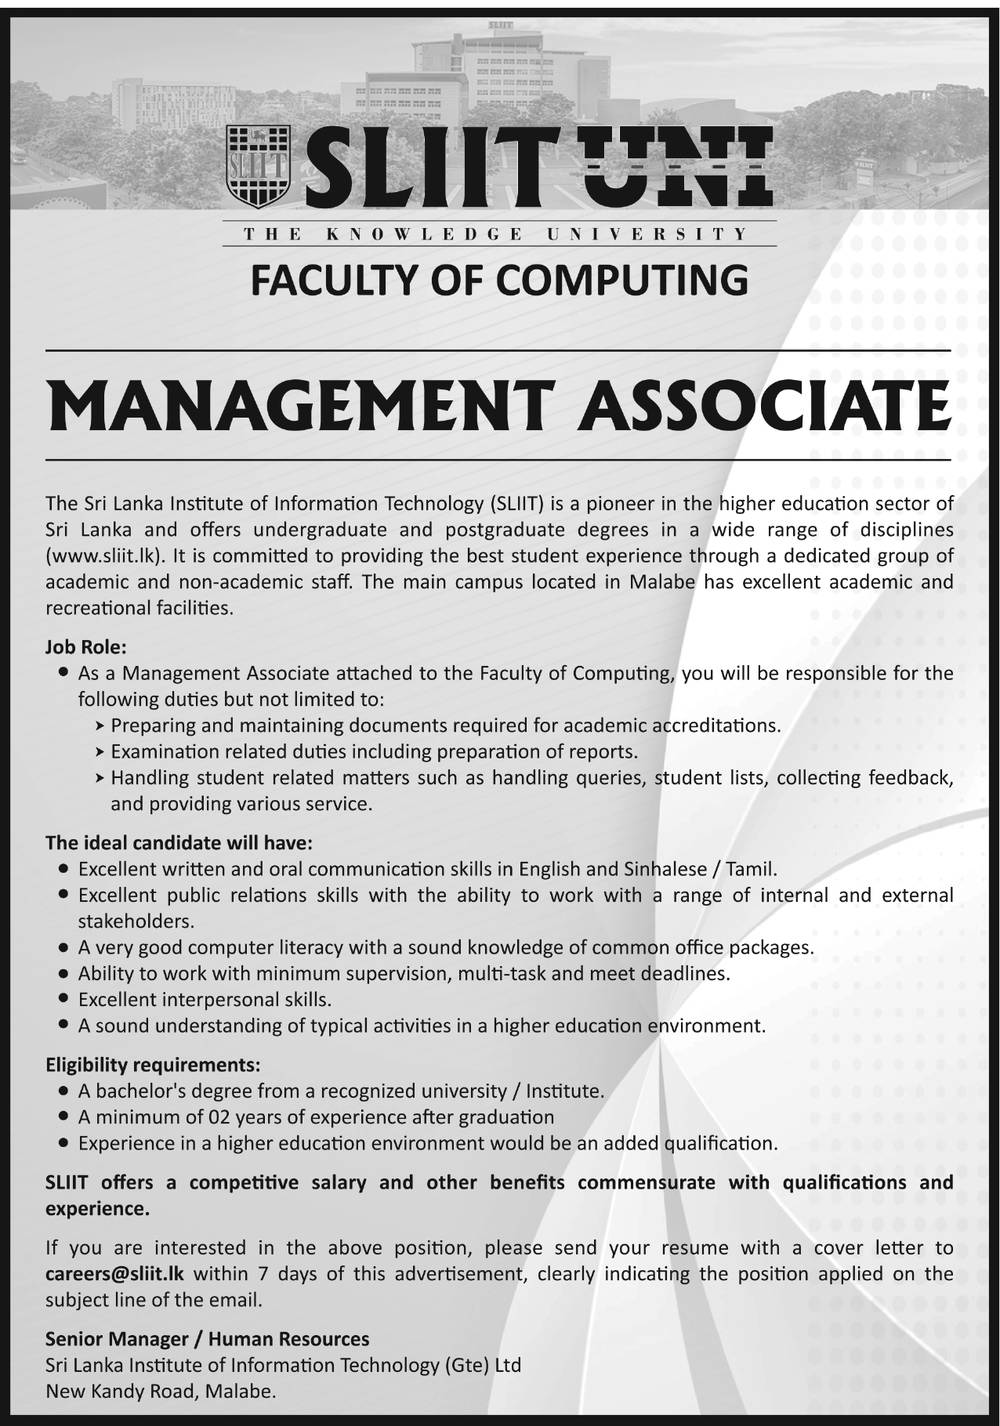 Vacancy in SLIIT Faculty of Computing - Management Associate